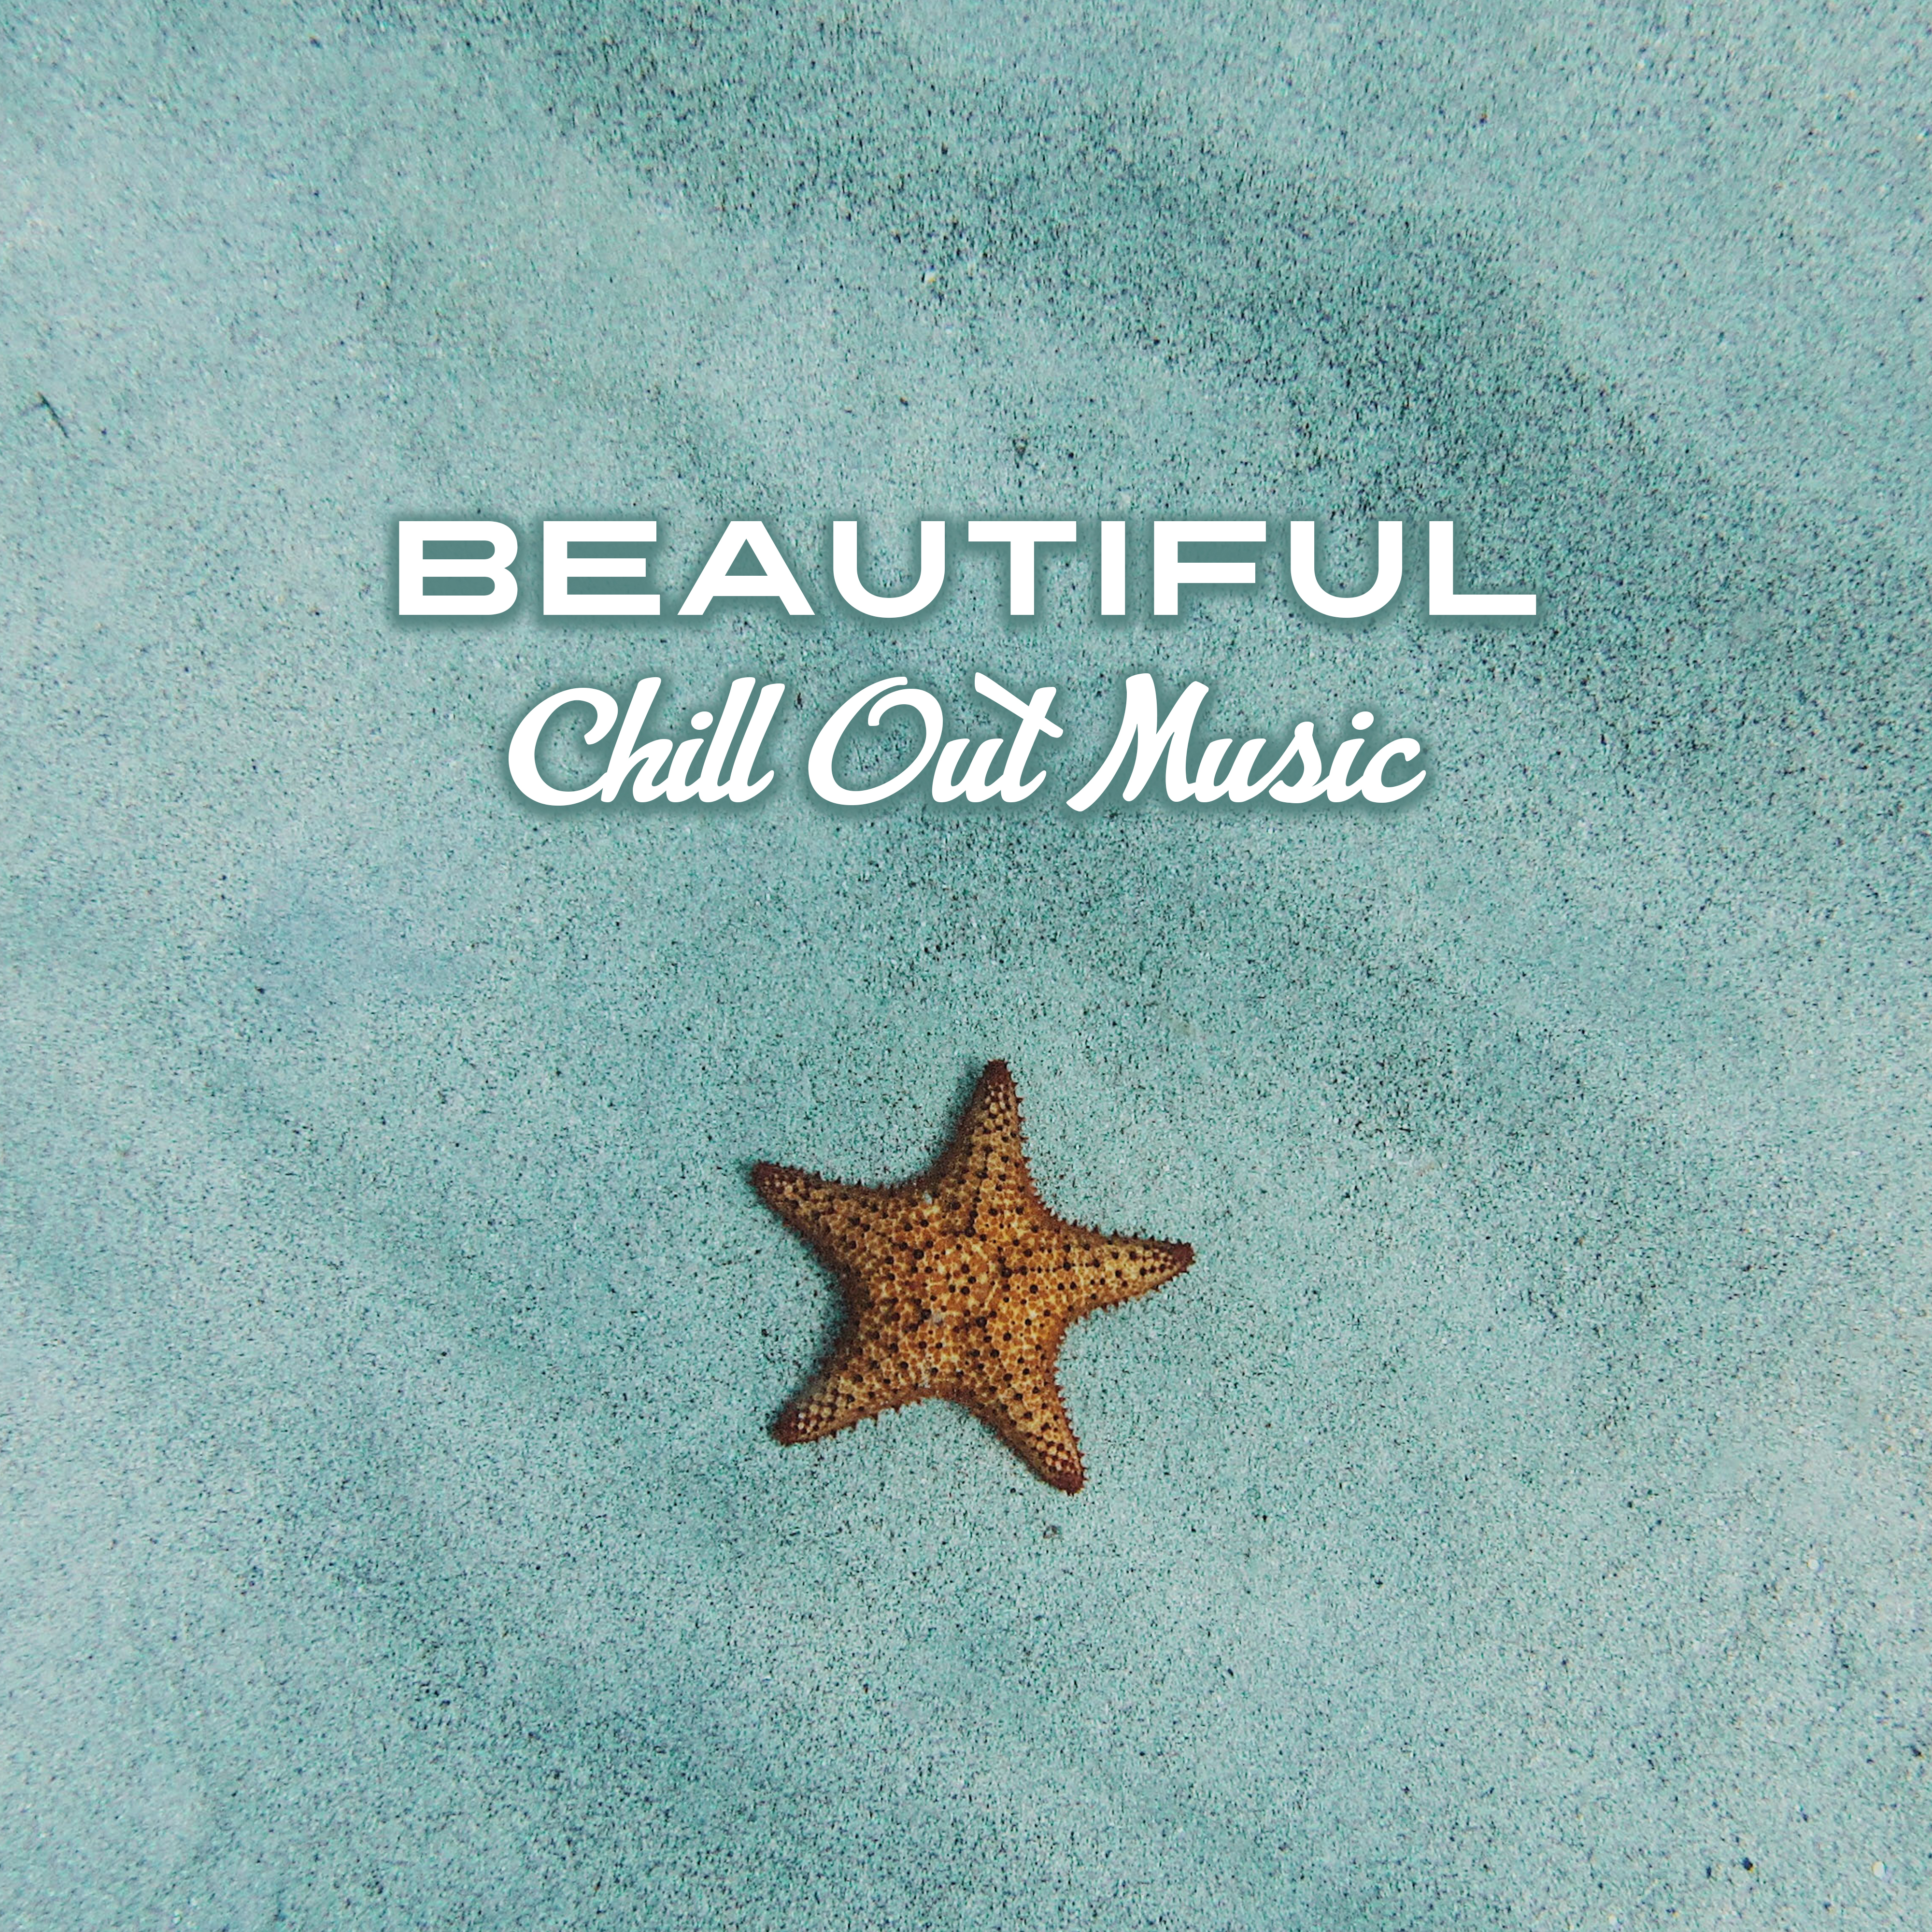 Beautiful Chill Out Music – Calming Waves, Beach Lounge, Electronic Vibes, Soothing Music